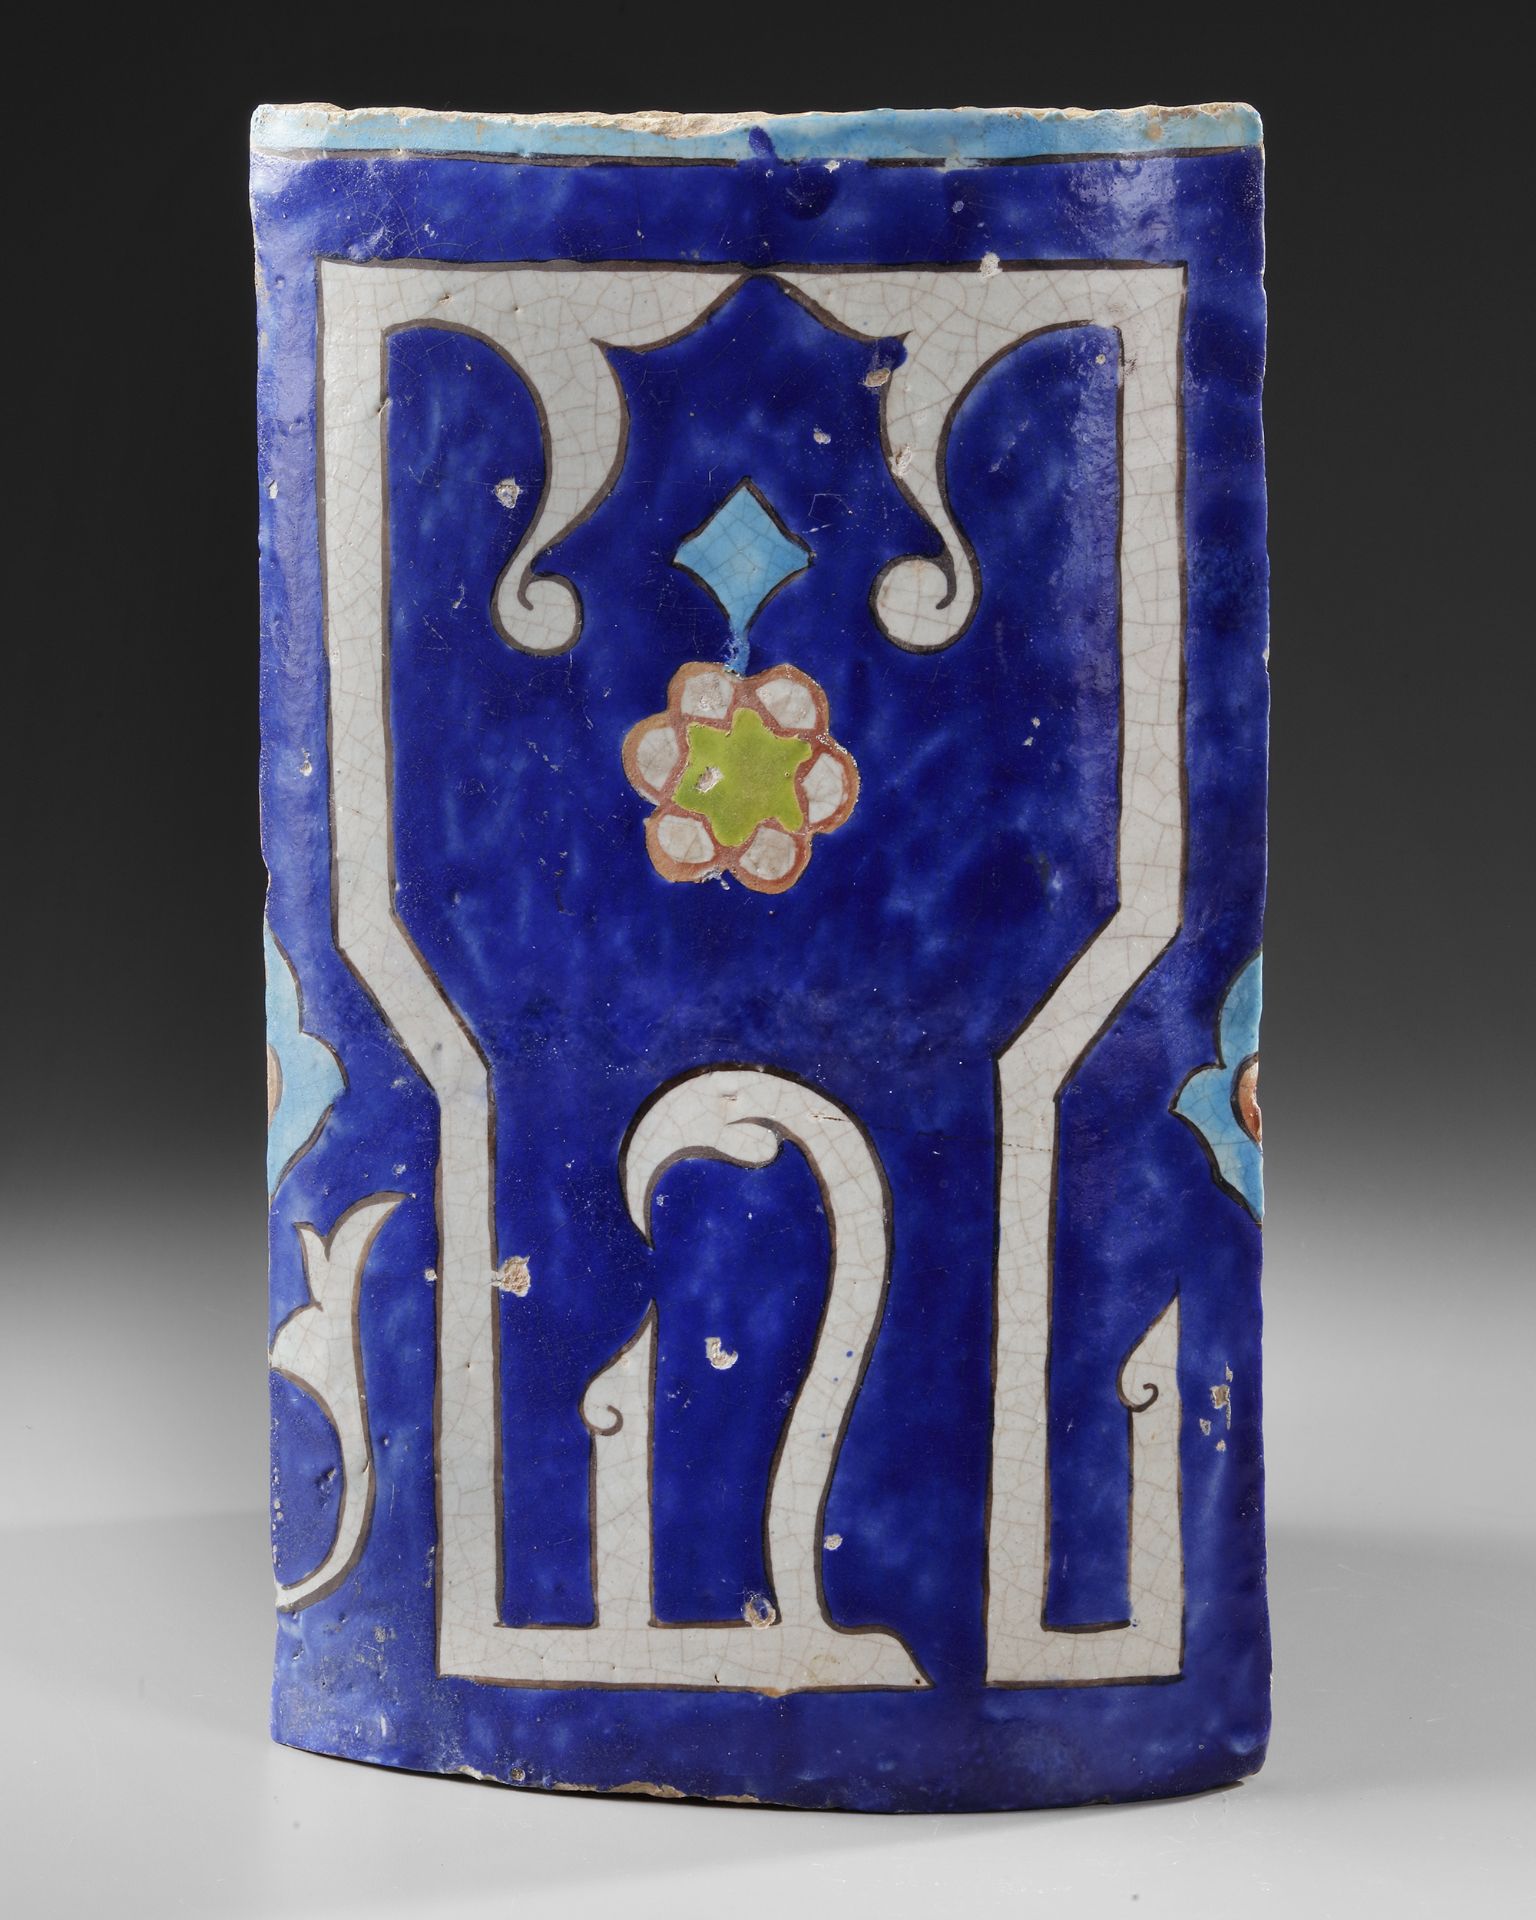 A TIMURID CALLIGRAPHIC POTTERY TILE, CENTRAL ASIA OR EASTERN PERSIA, 14TH-15TH CENTURY - Image 3 of 10